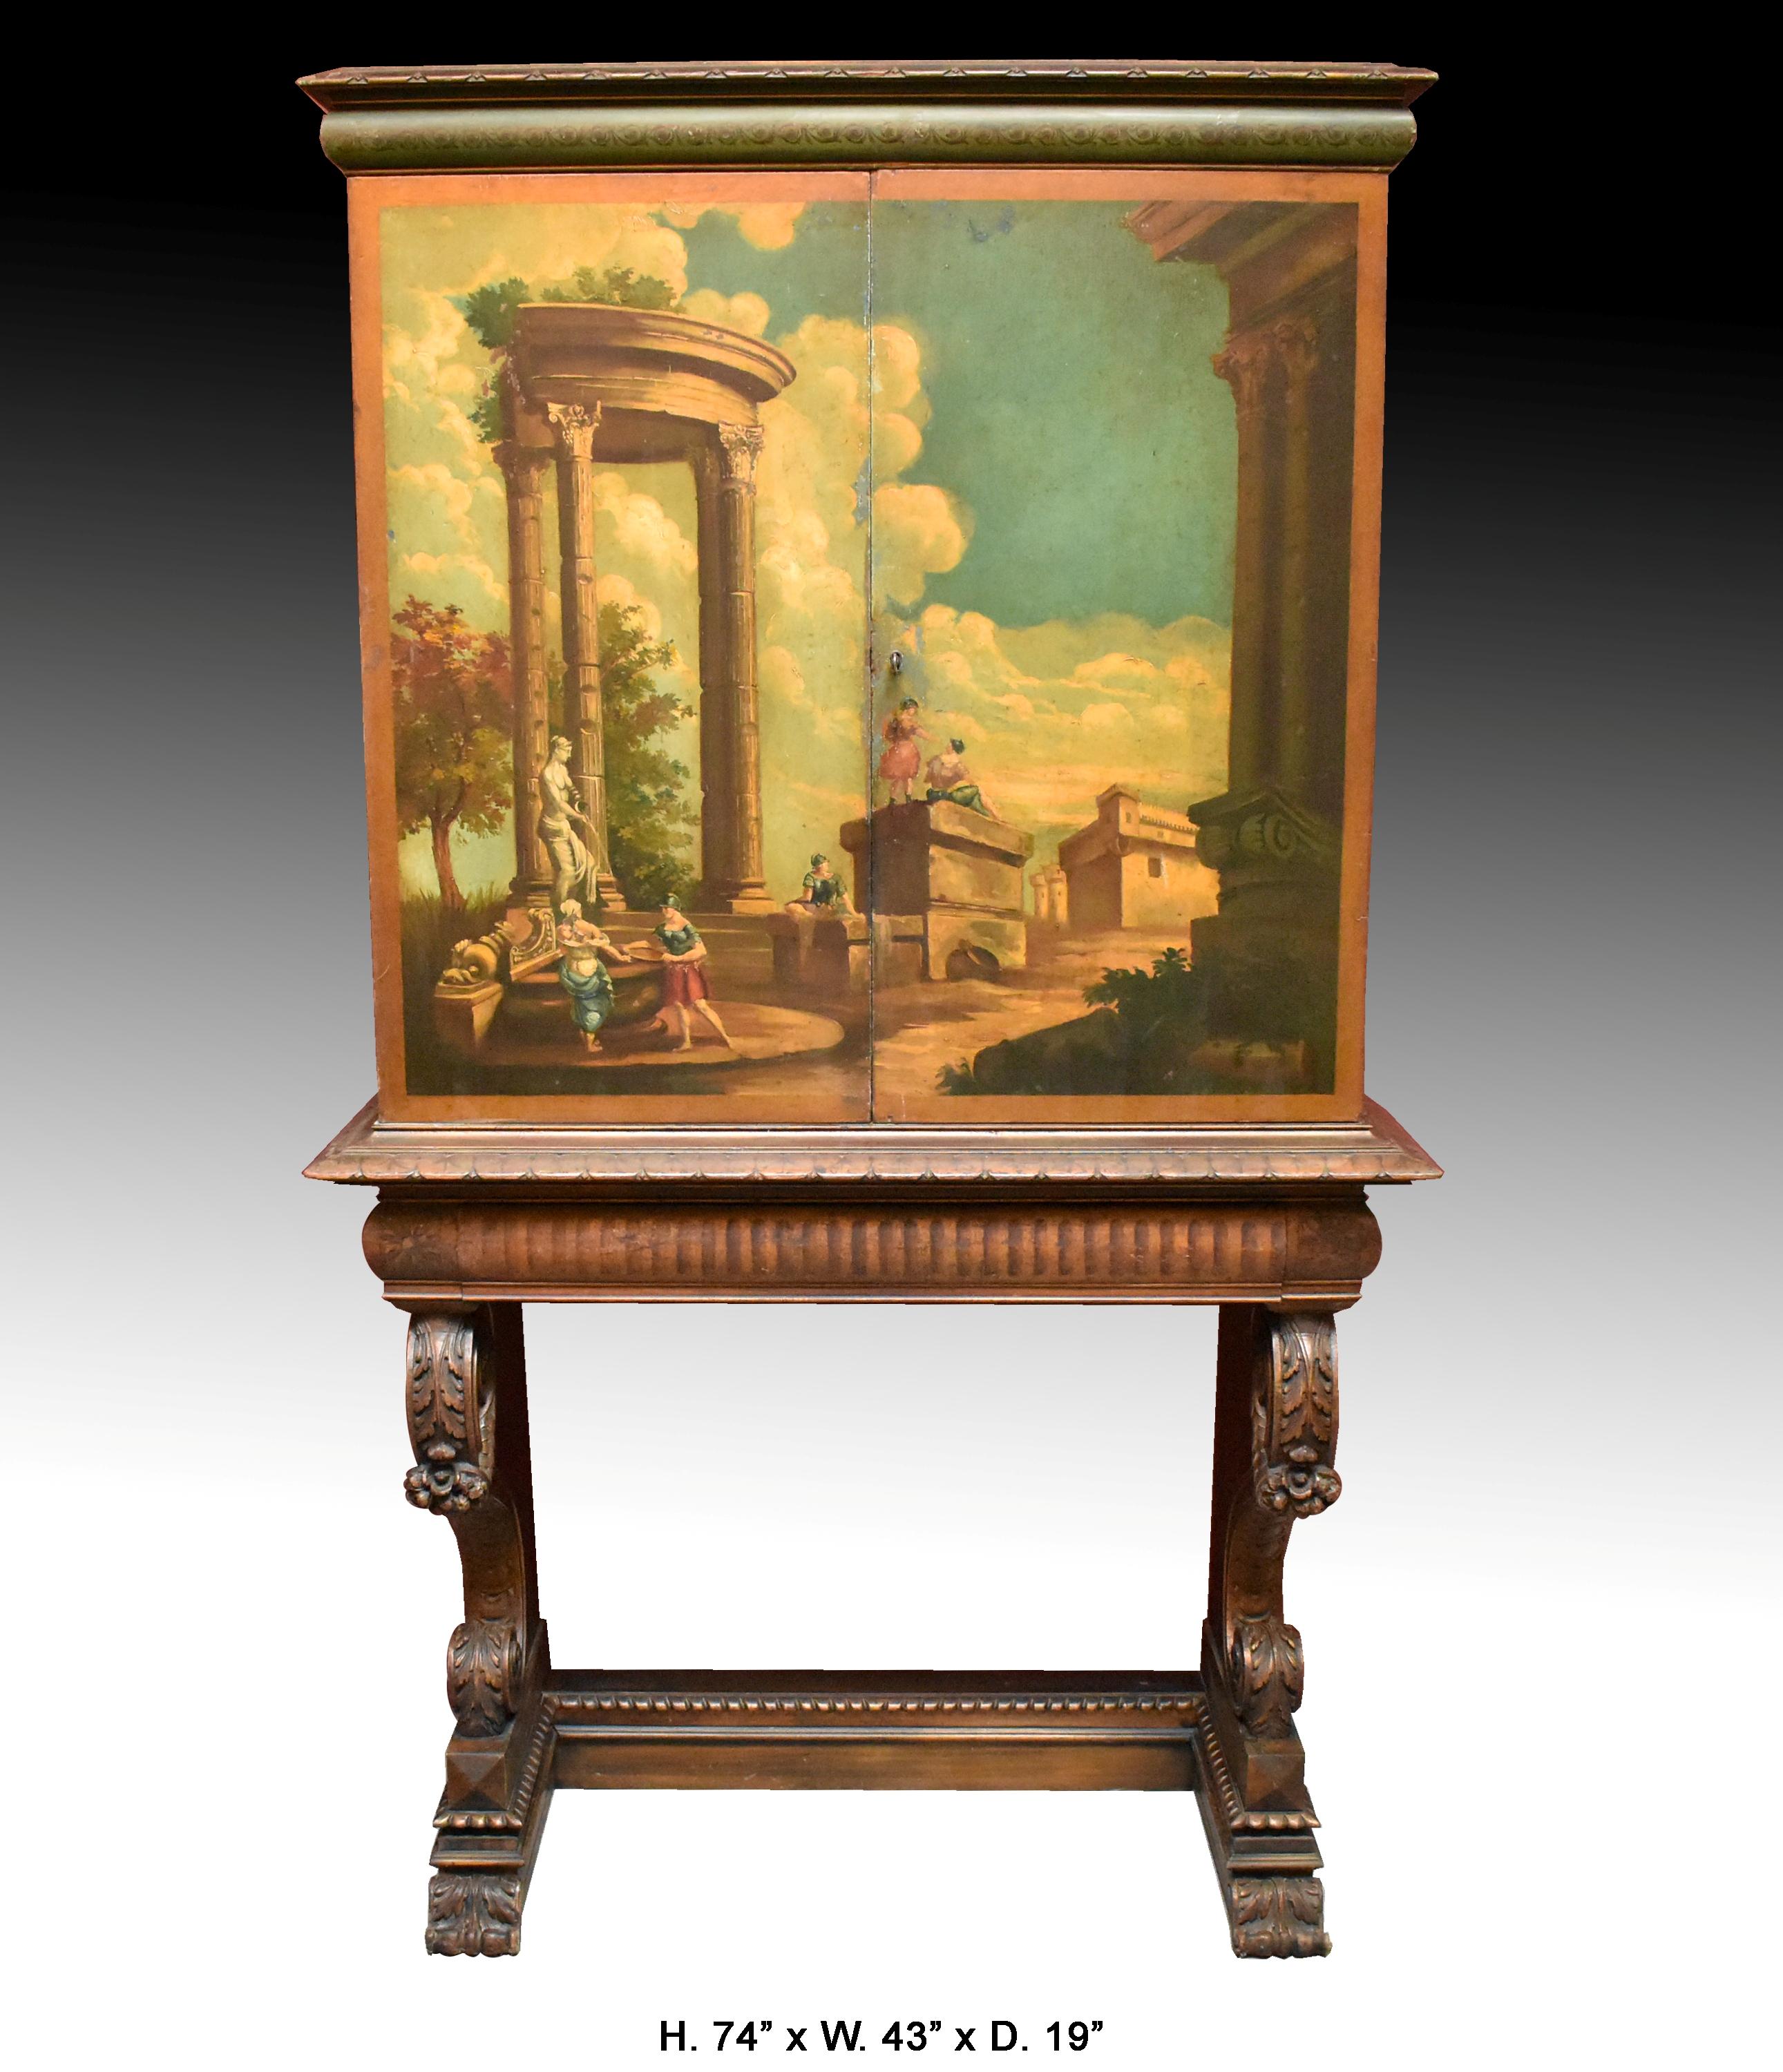 Fabulous Italian neoclassical style hand painted two-door cabinet on stand,
First half of the 20th century.

The cabinet is surmounted with a moulded cornice, above two hand-painted doors depicting a Roman architectural landscape scene with